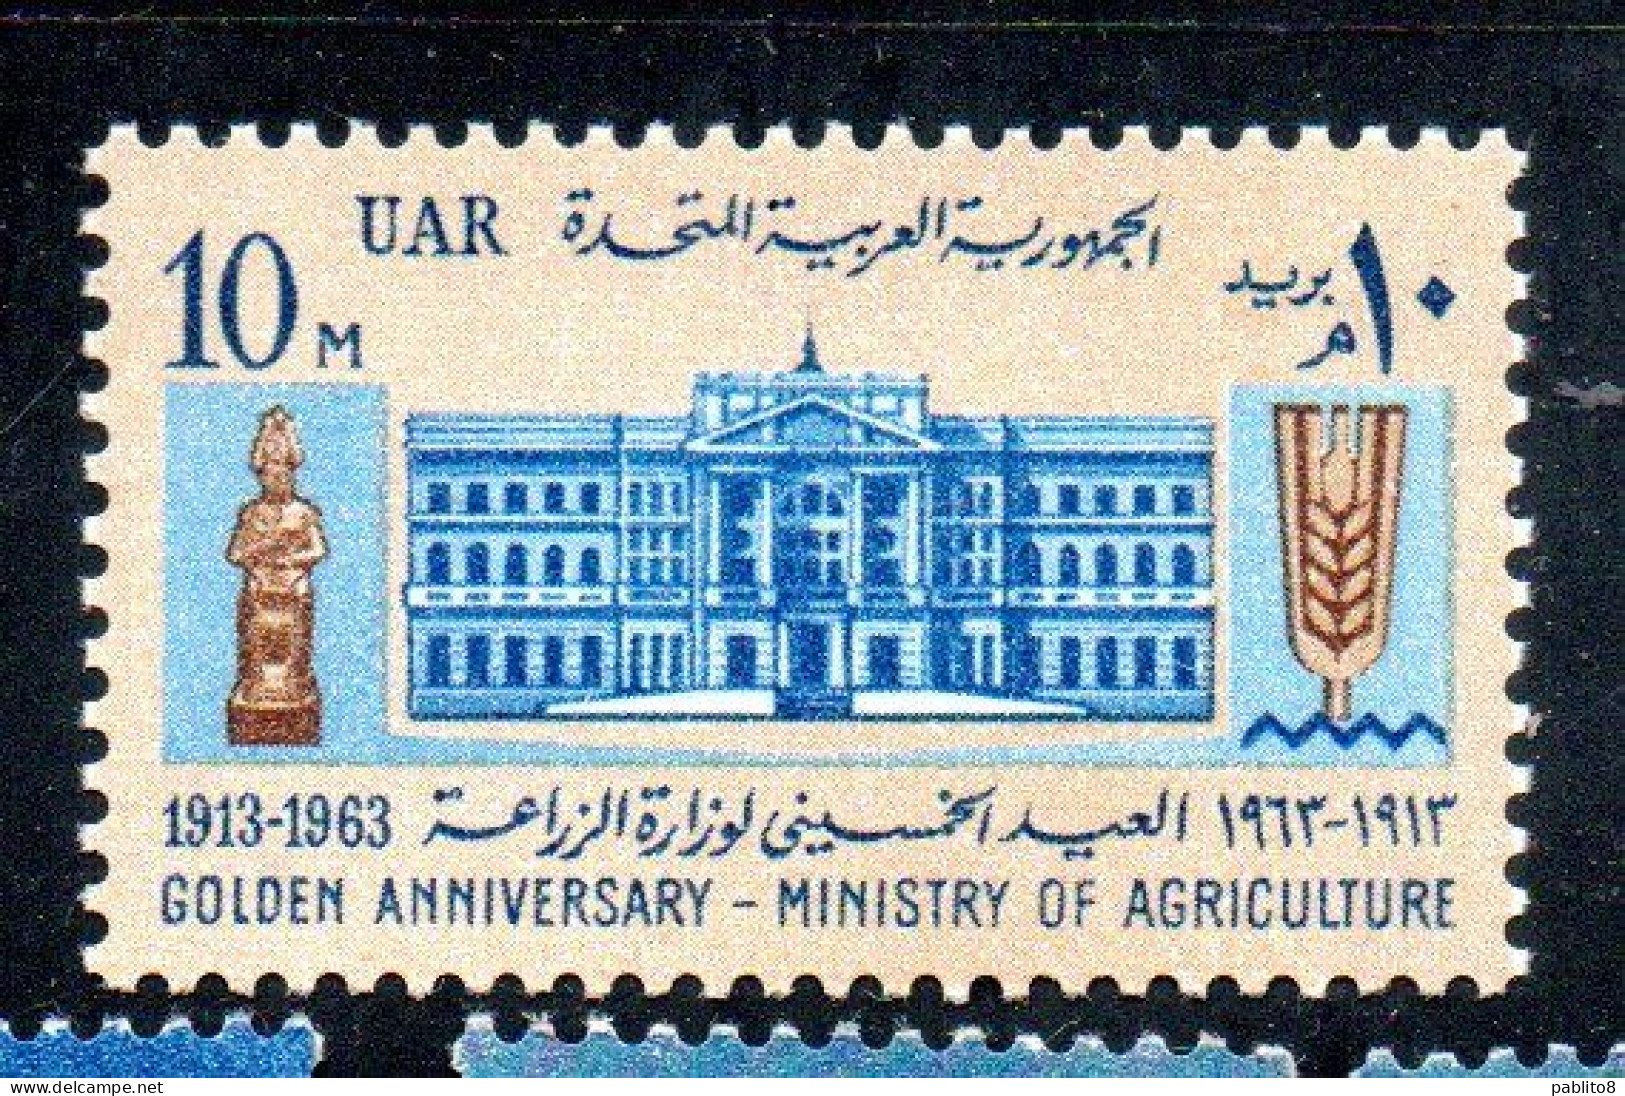 UAR EGYPT EGITTO 1963 50th ANNIVERSARY OF MINISTRY OF AGRICULTURAL 10m MNH - Ungebraucht